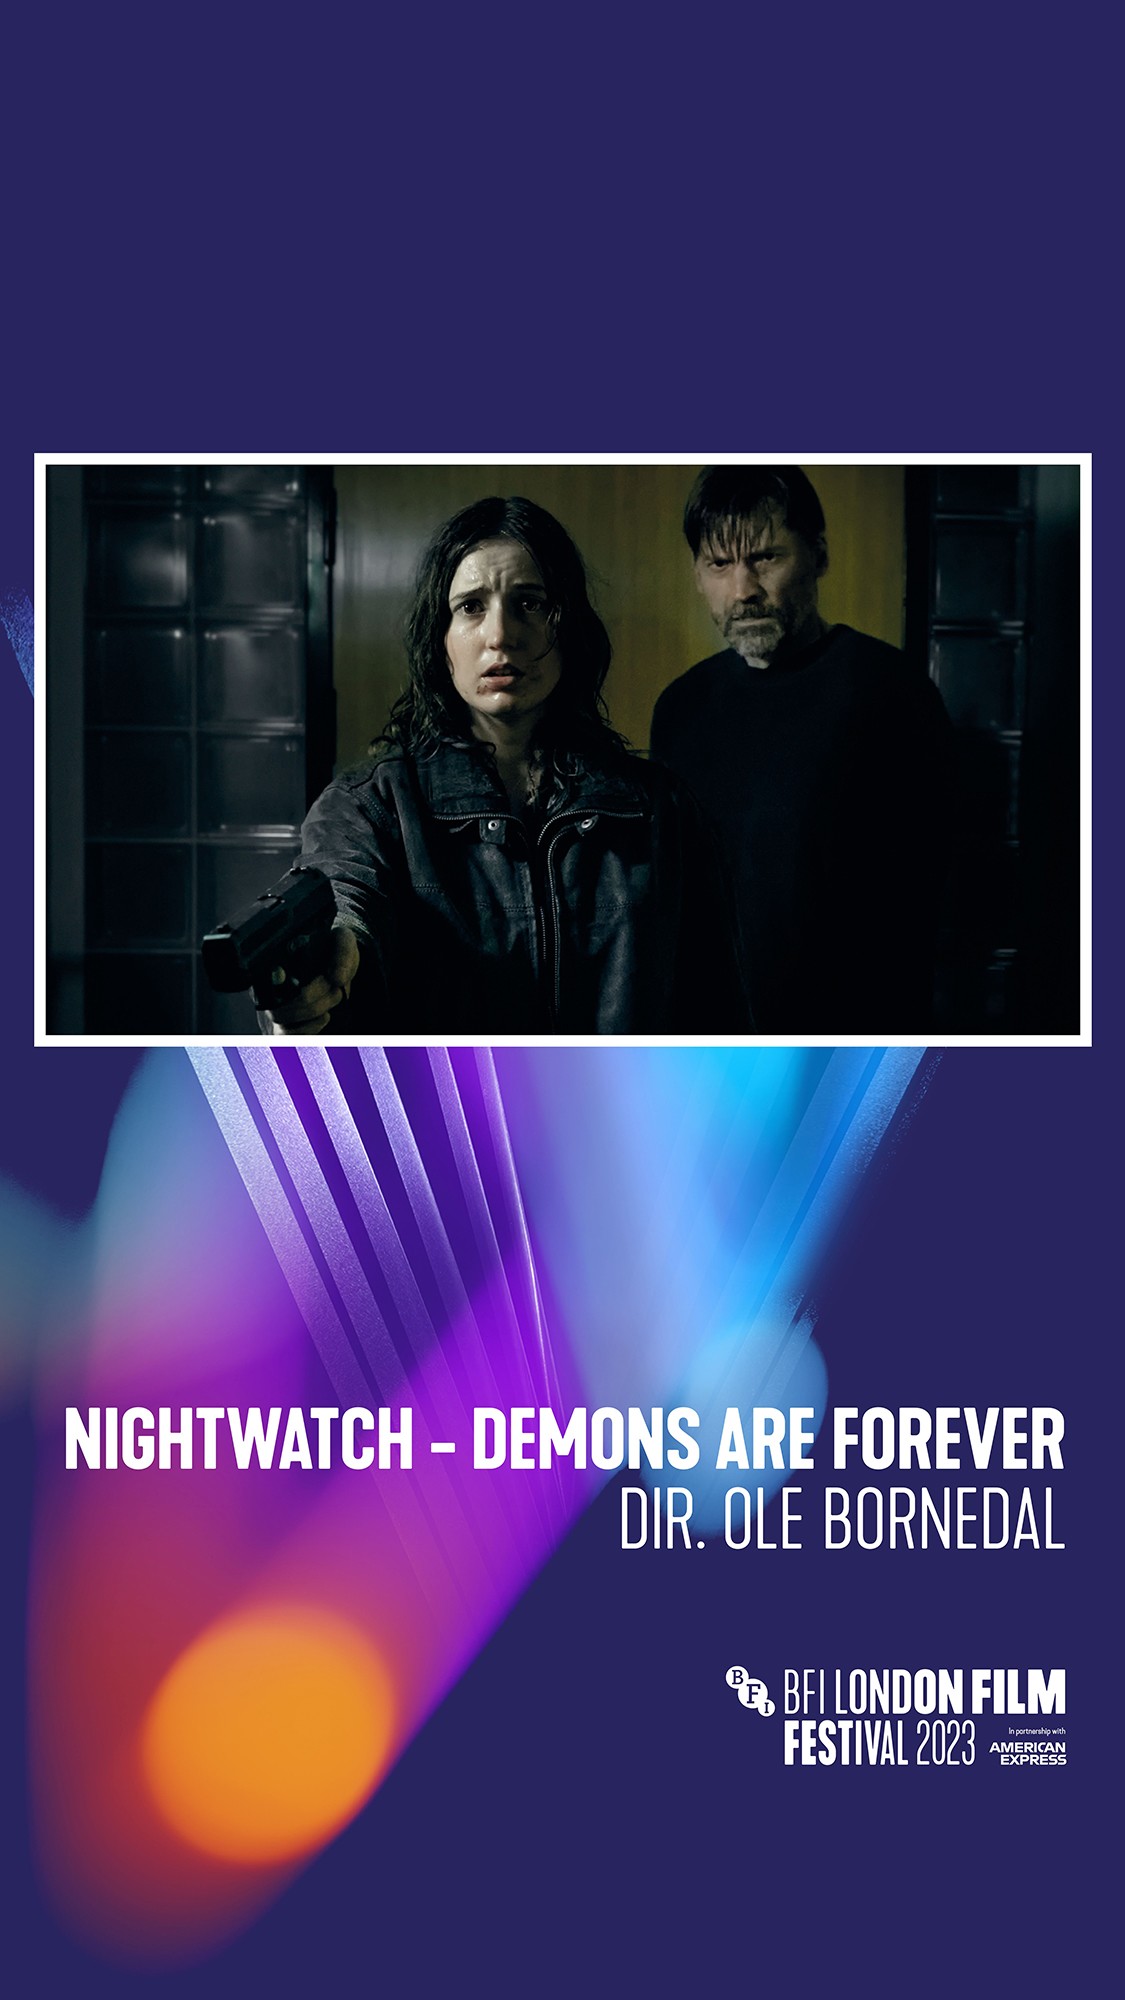 NIGHTWATCH – DEMONS ARE FOREVER